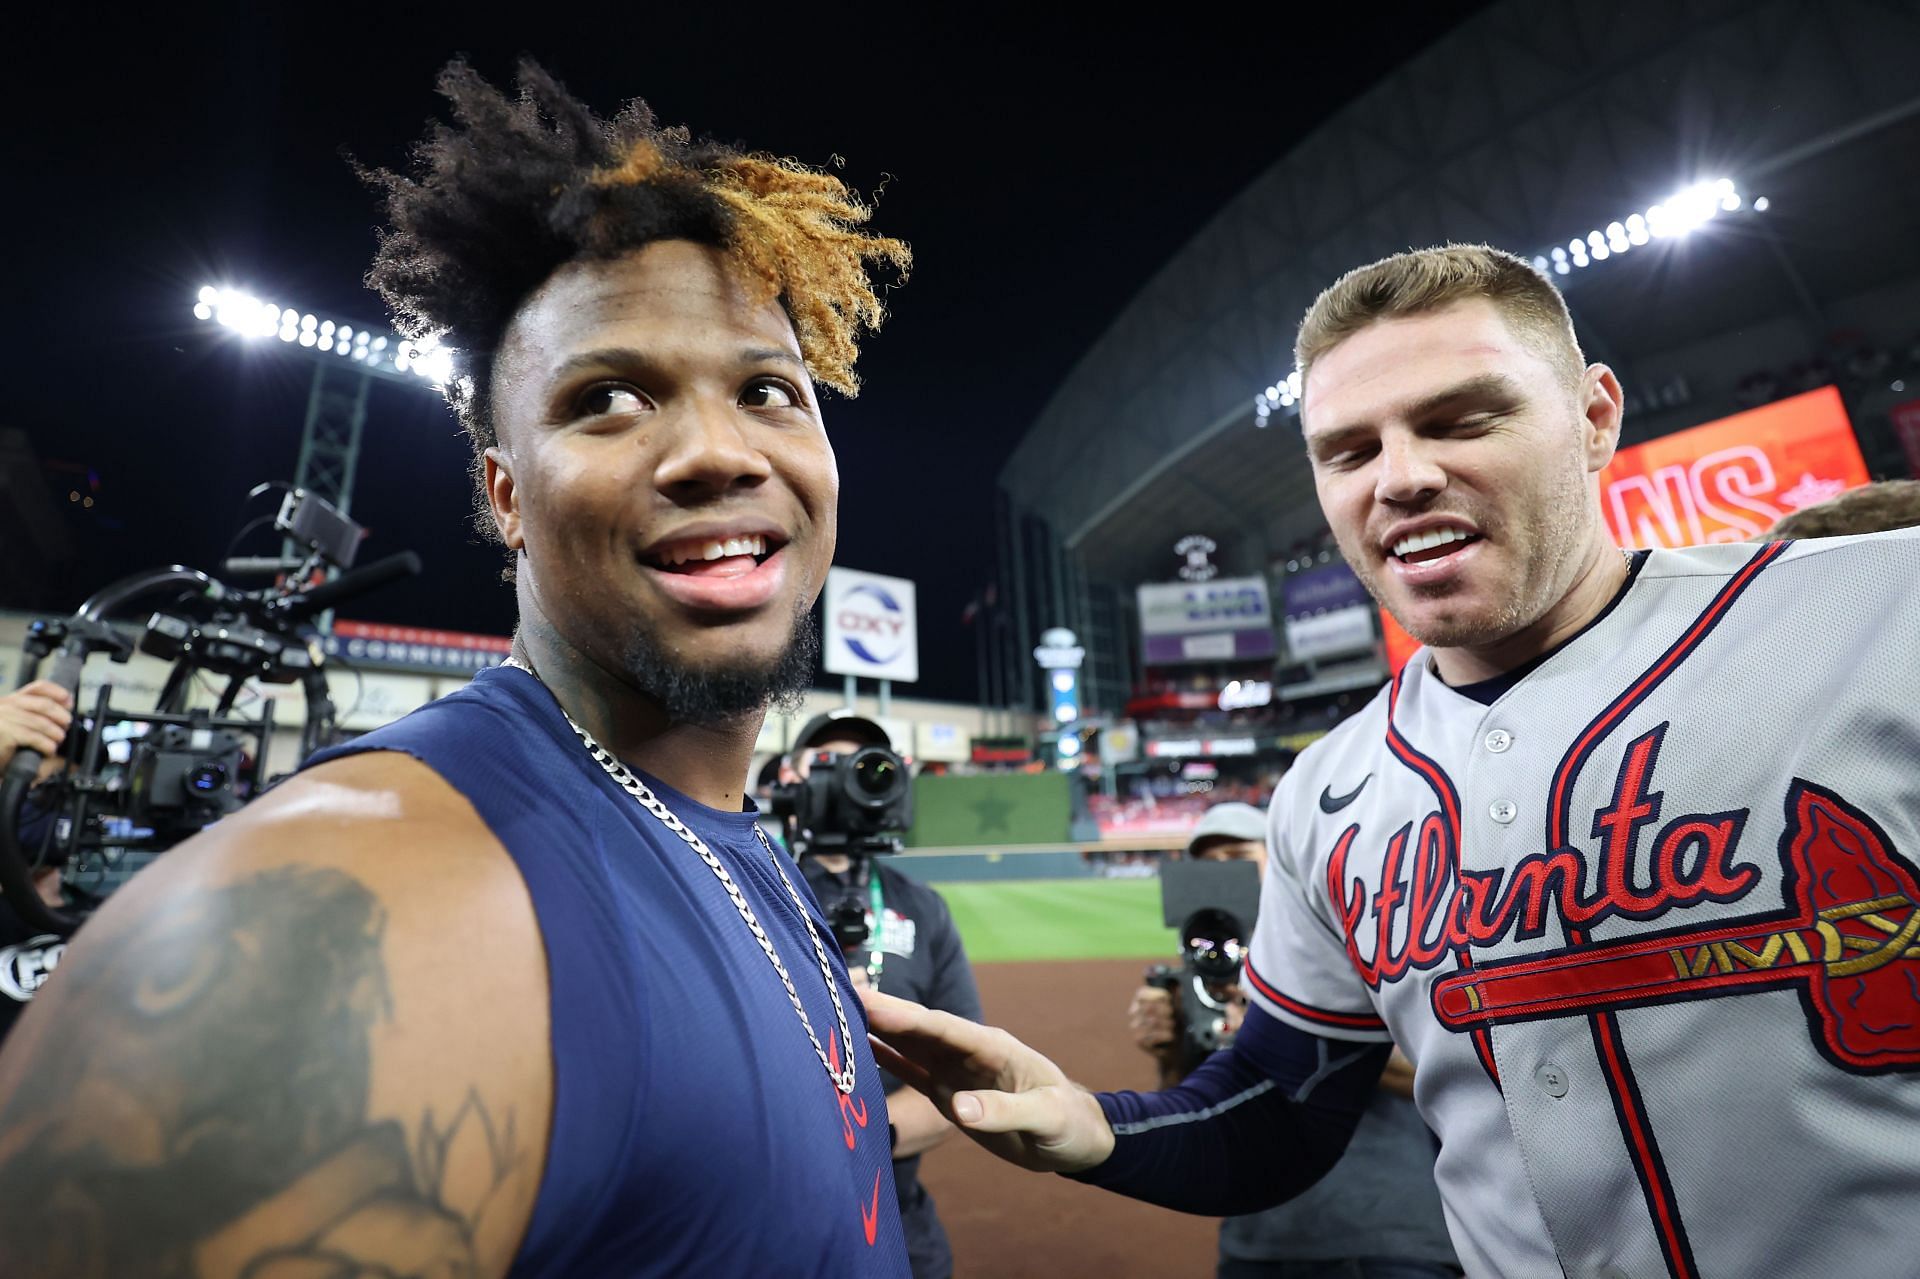 Braves players make clear their frustration on Freddie Freeman chase